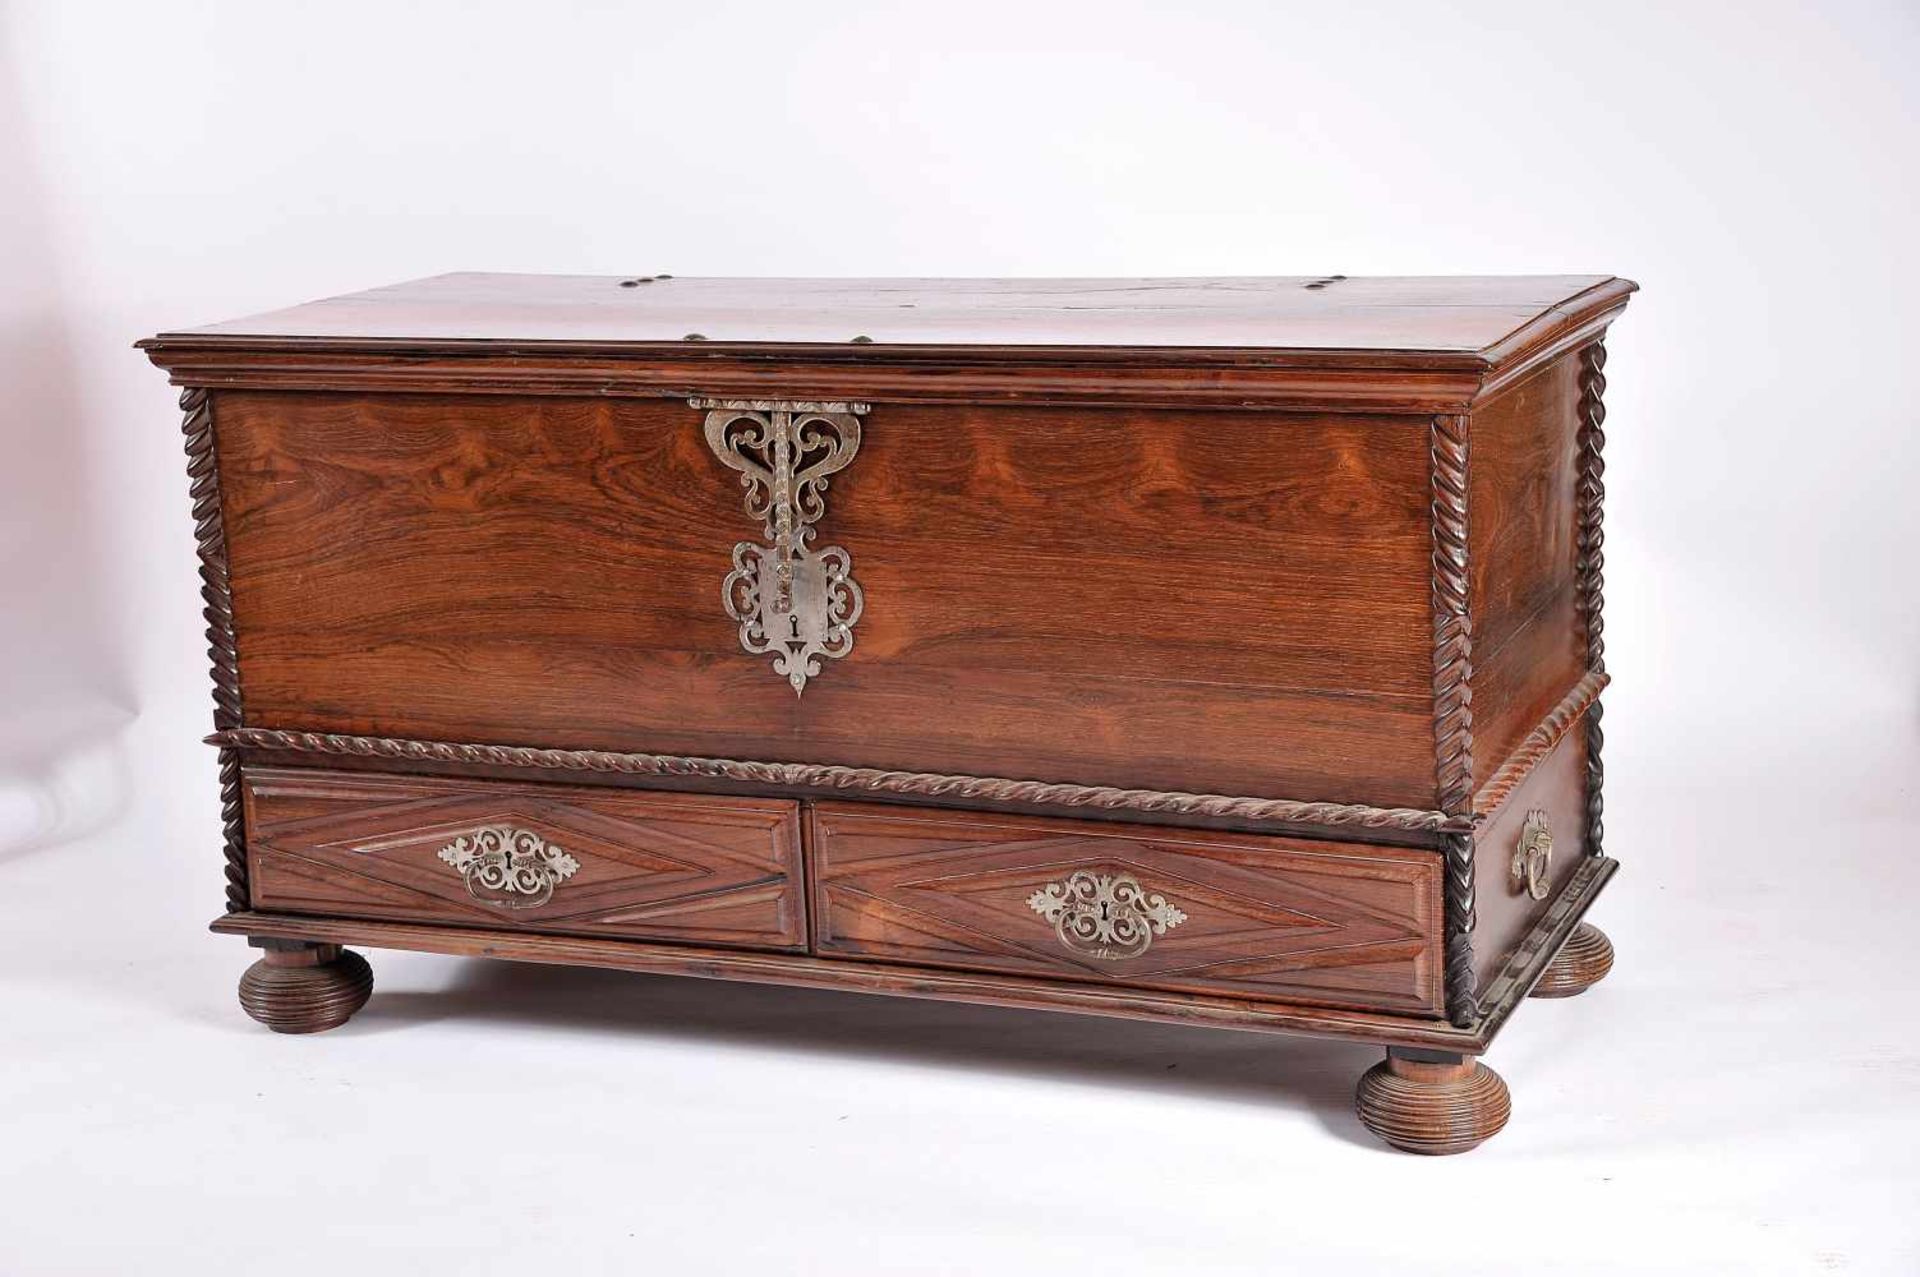 A Large Chest with Two Drawers, mannerist, Brazilian rosewood, ripple moulded friezes, padded